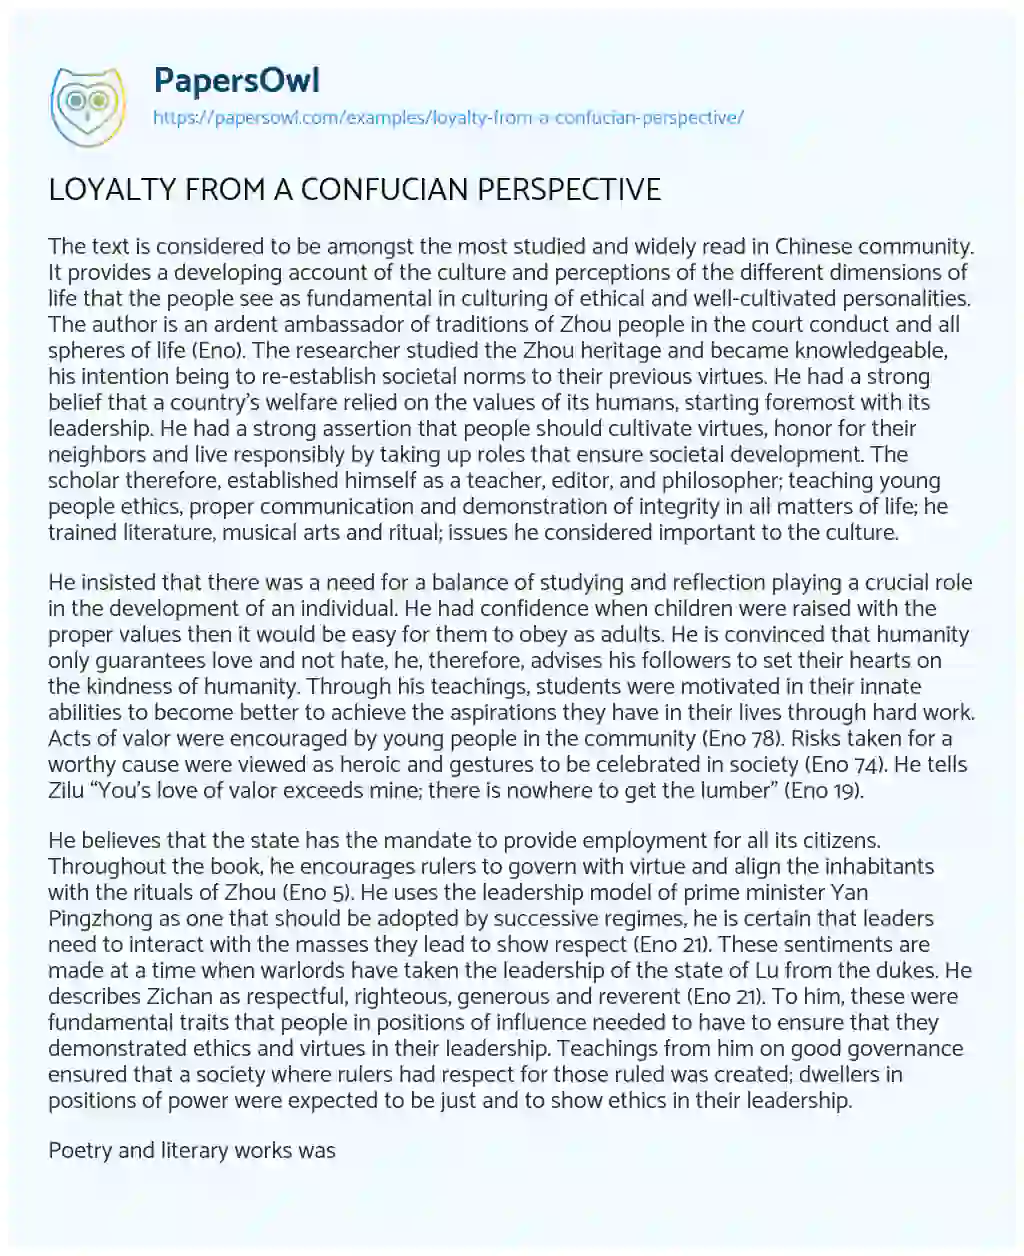 Essay on LOYALTY from a CONFUCIAN PERSPECTIVE